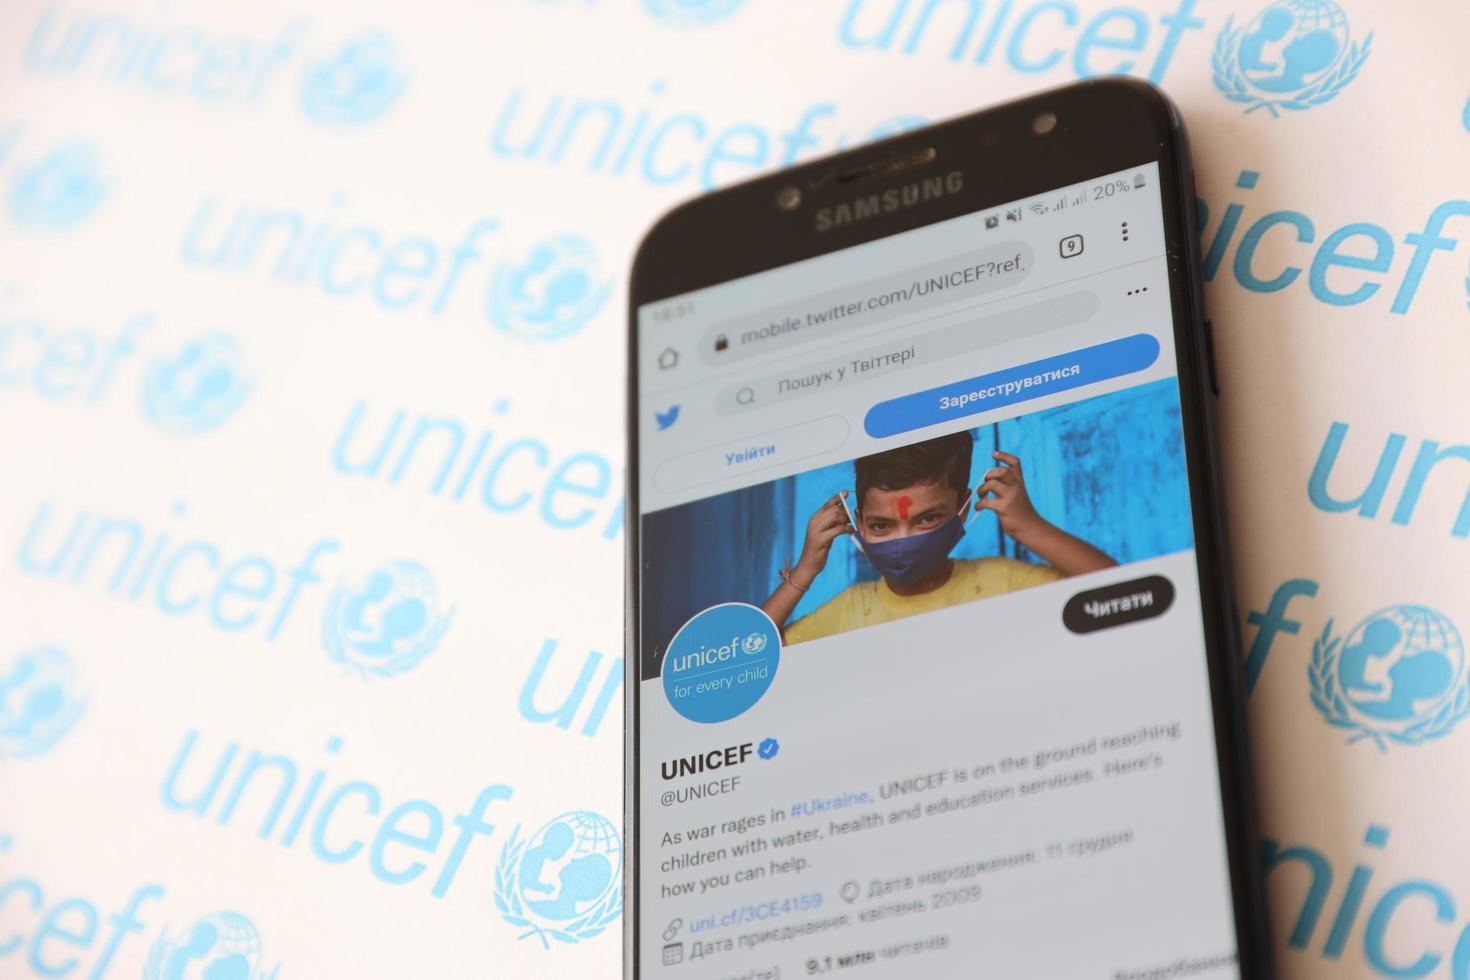 TERNOPIL, UKRAINE - MAY 2, 2022 UNICEF twitter account on smartphone screen - United Nations programm that provides humanitarian and developmental assistance to children photo